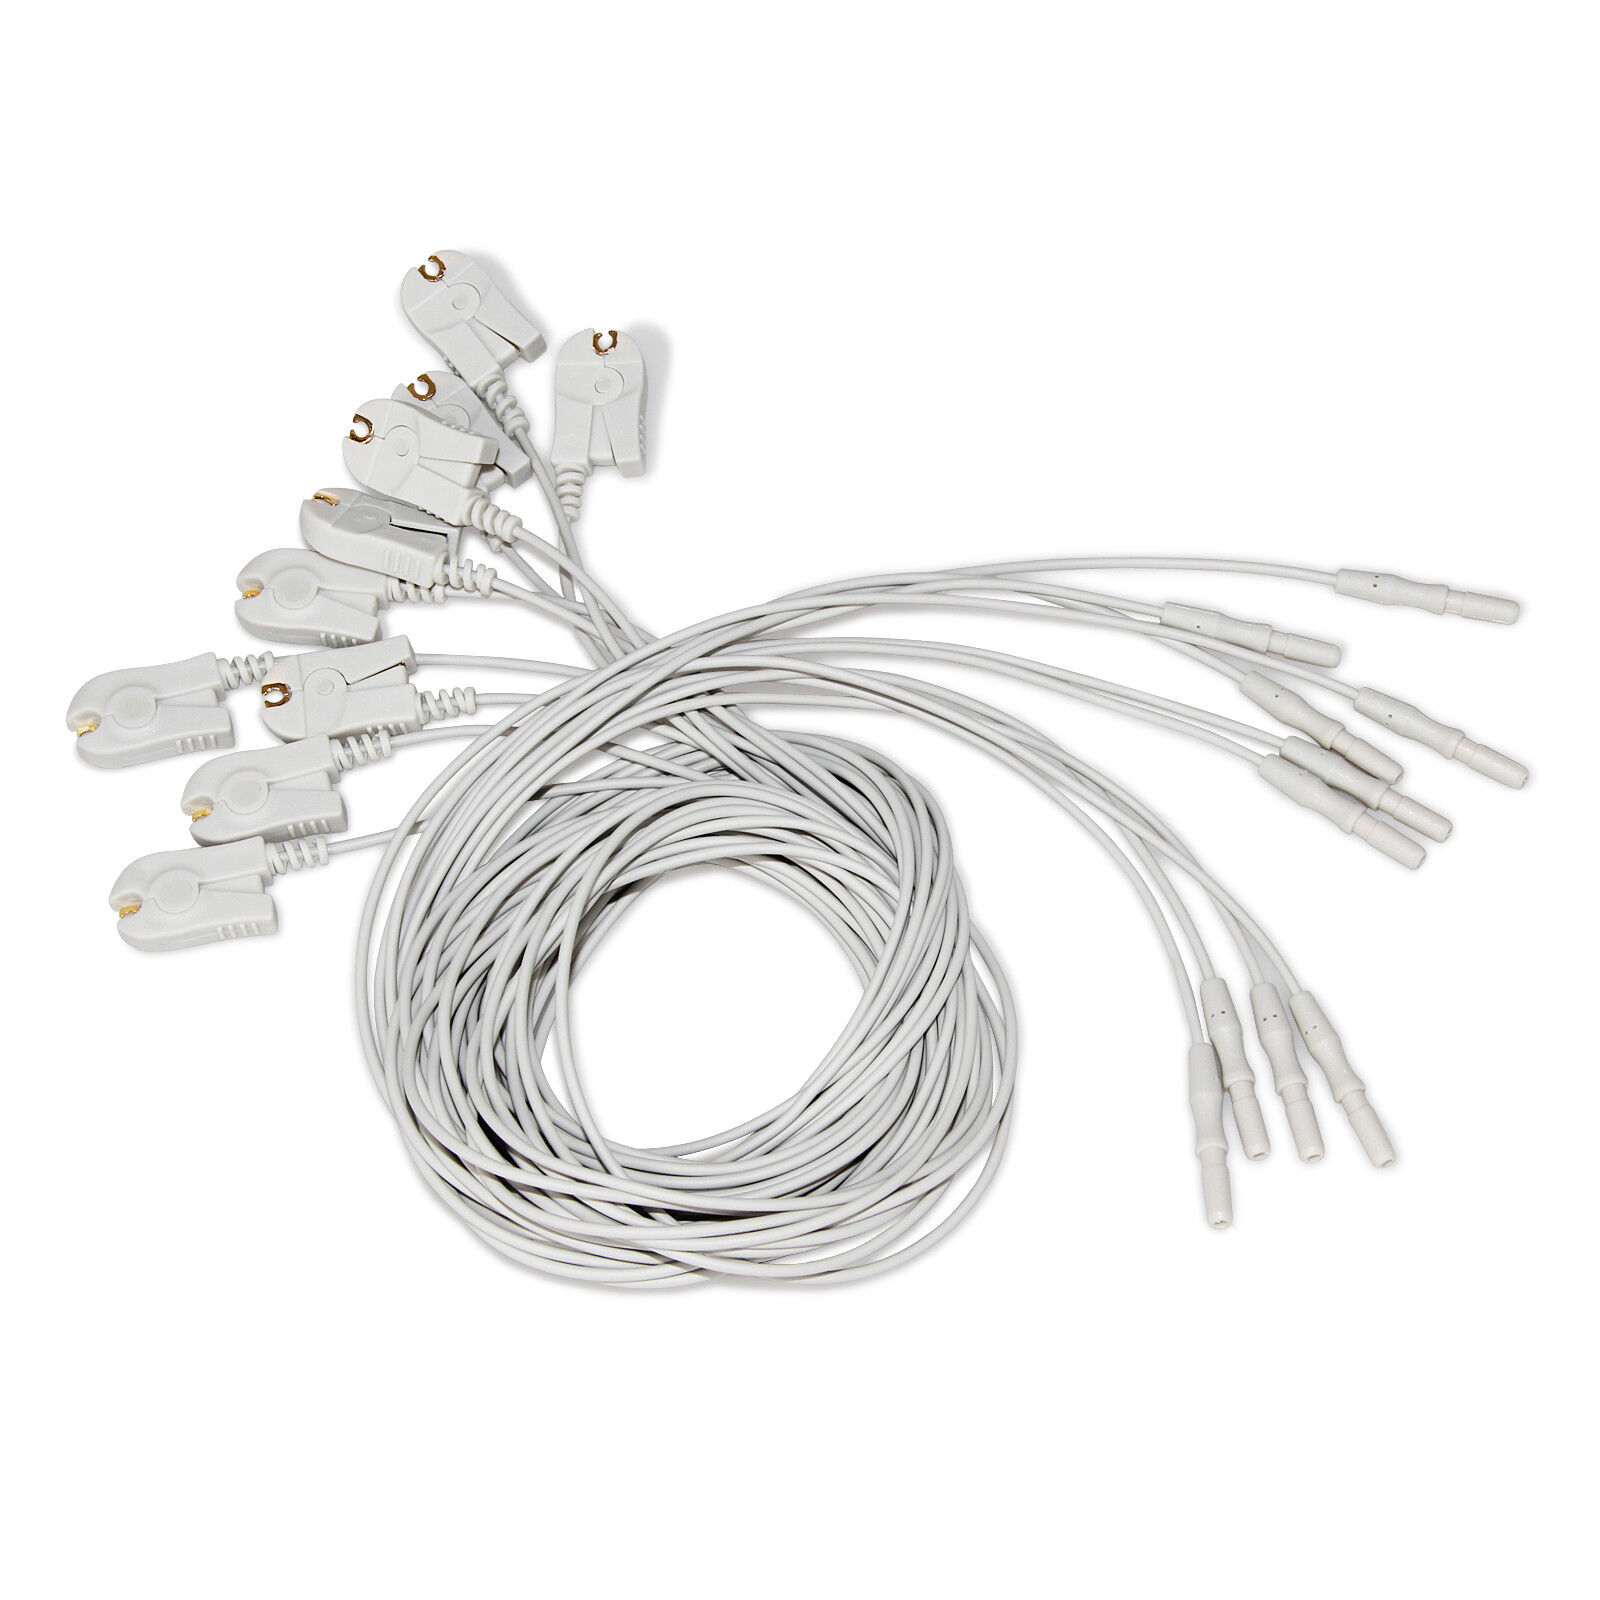 Newest 10 pcs of EEG security Cable 2400 CONTEC KT88 Our shop OFFers the best service machine for